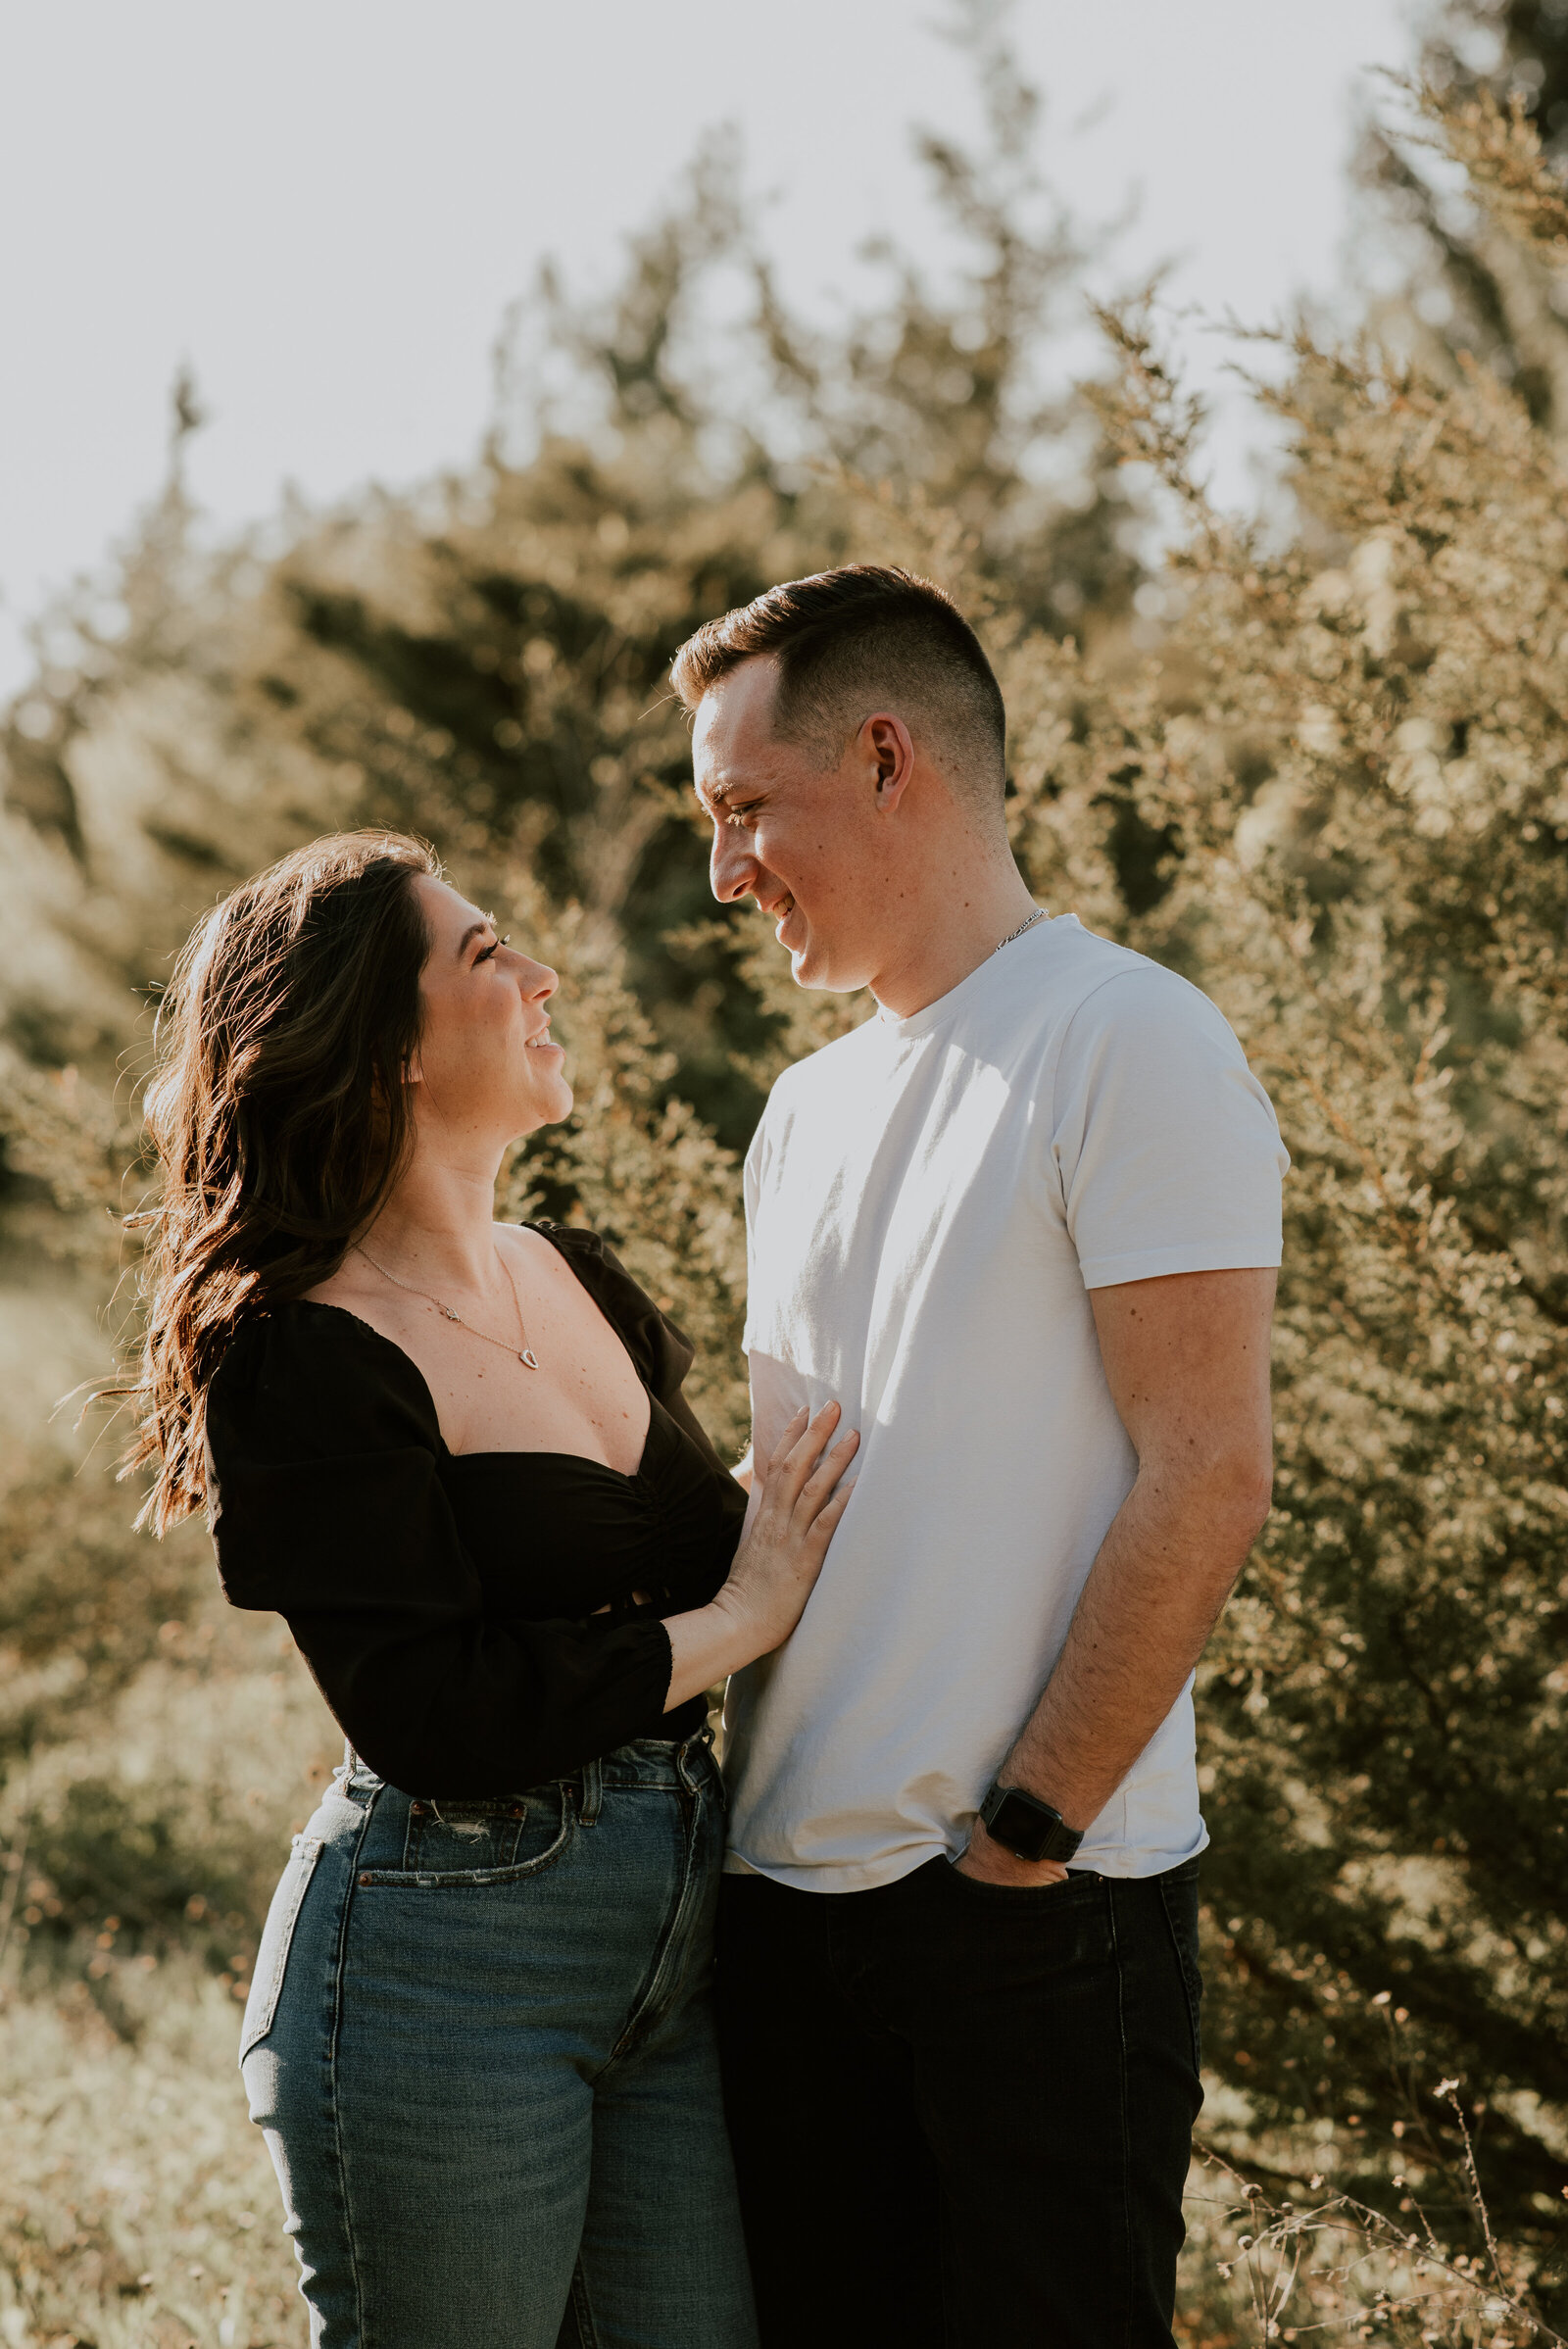 MAINGALLERY2022-05-10 Sam and Max Engagement Session163297-3